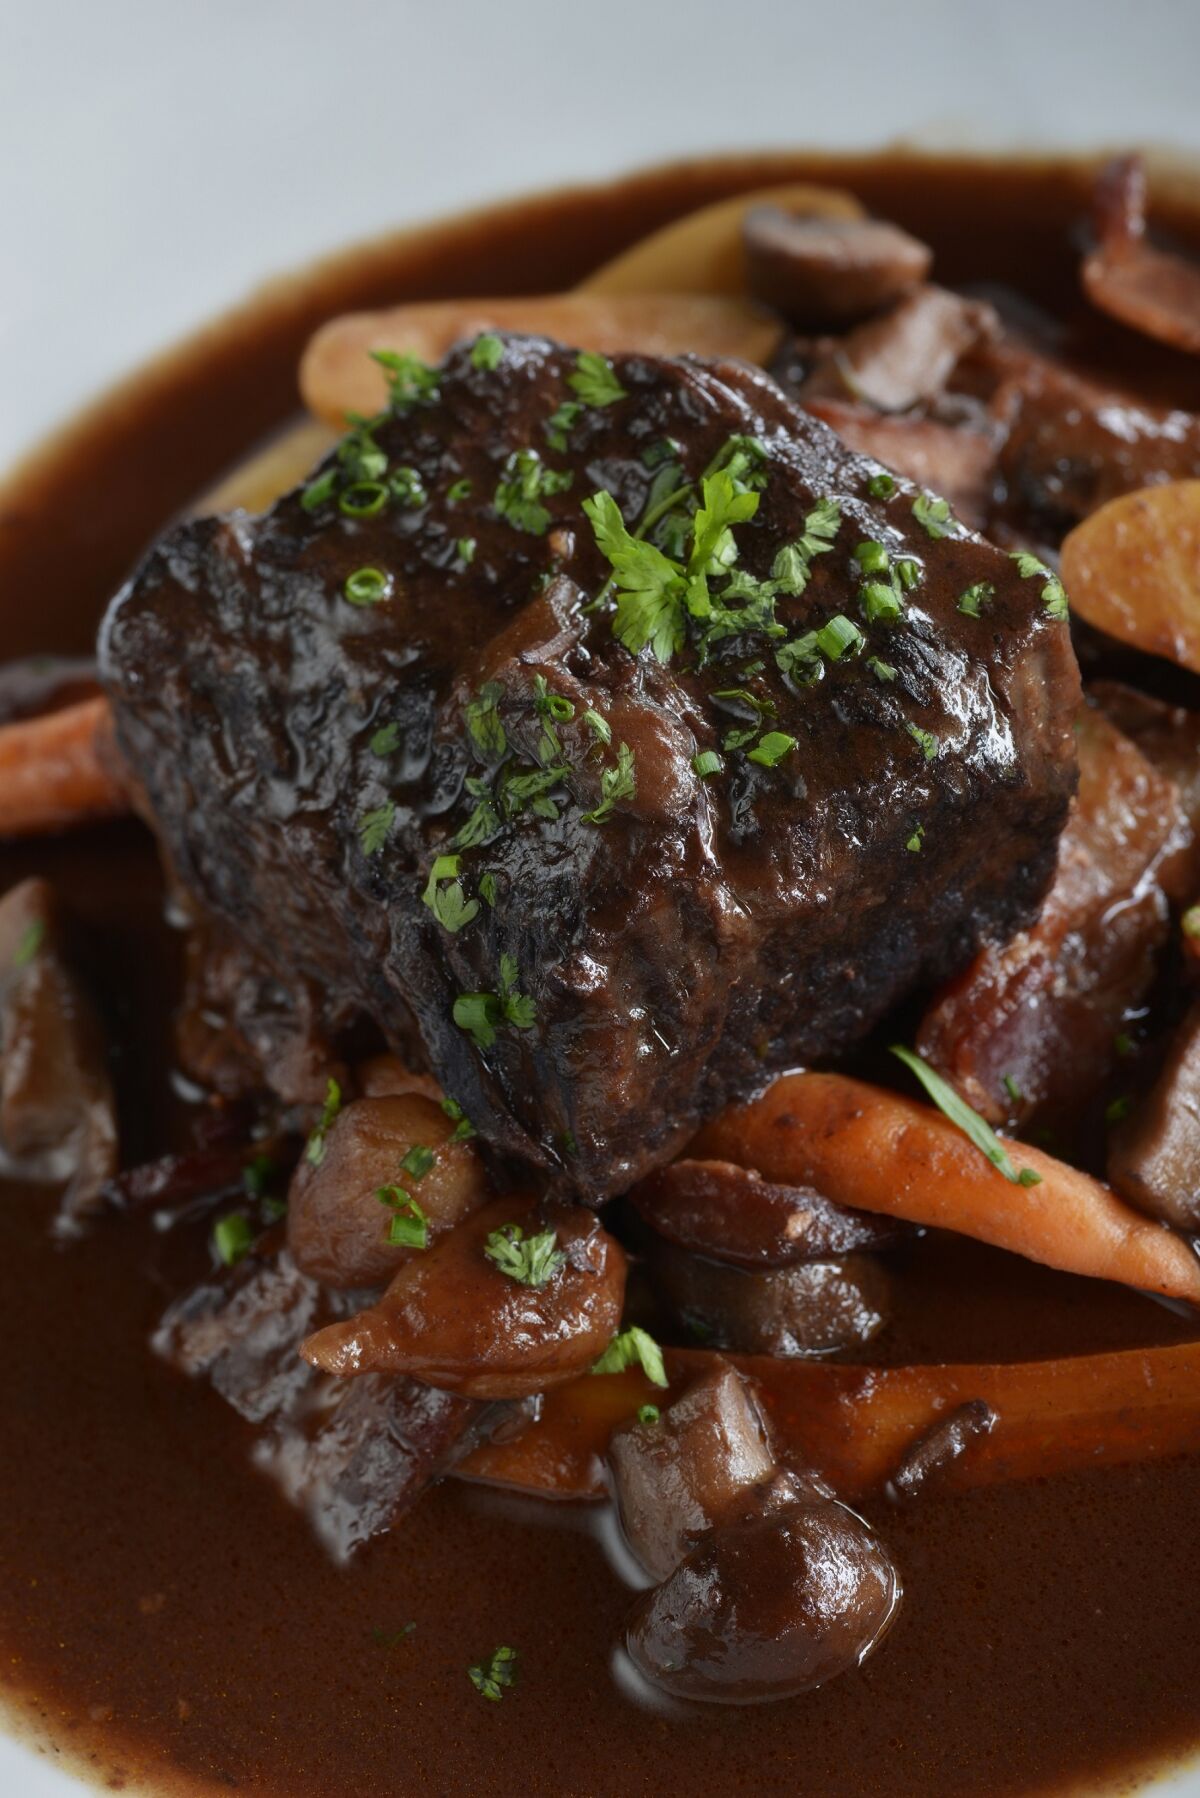 Bleu Boheme is offering a boeuf bourguignon special on June 18 and 19.